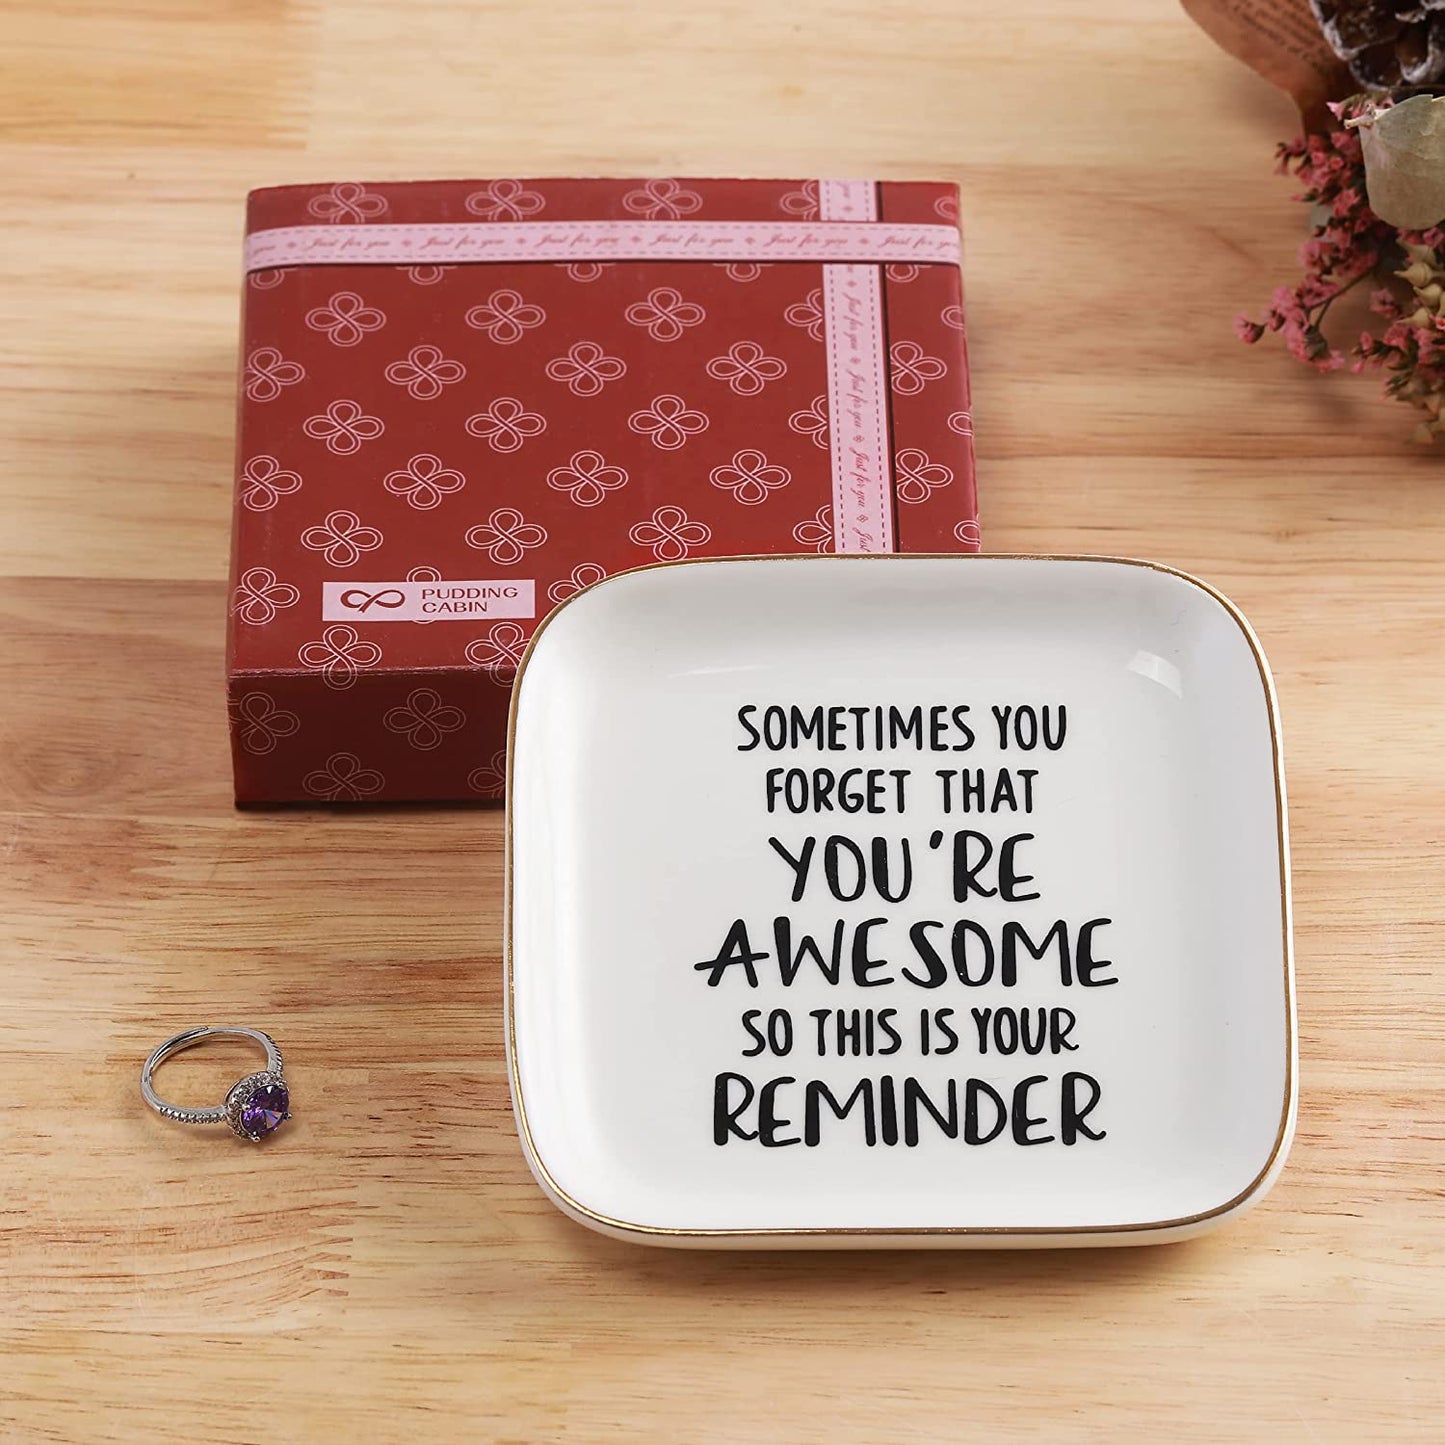 A ring dish with a printed quote which says, "Sometimes you forget that you're awesome, so this is your reminder"